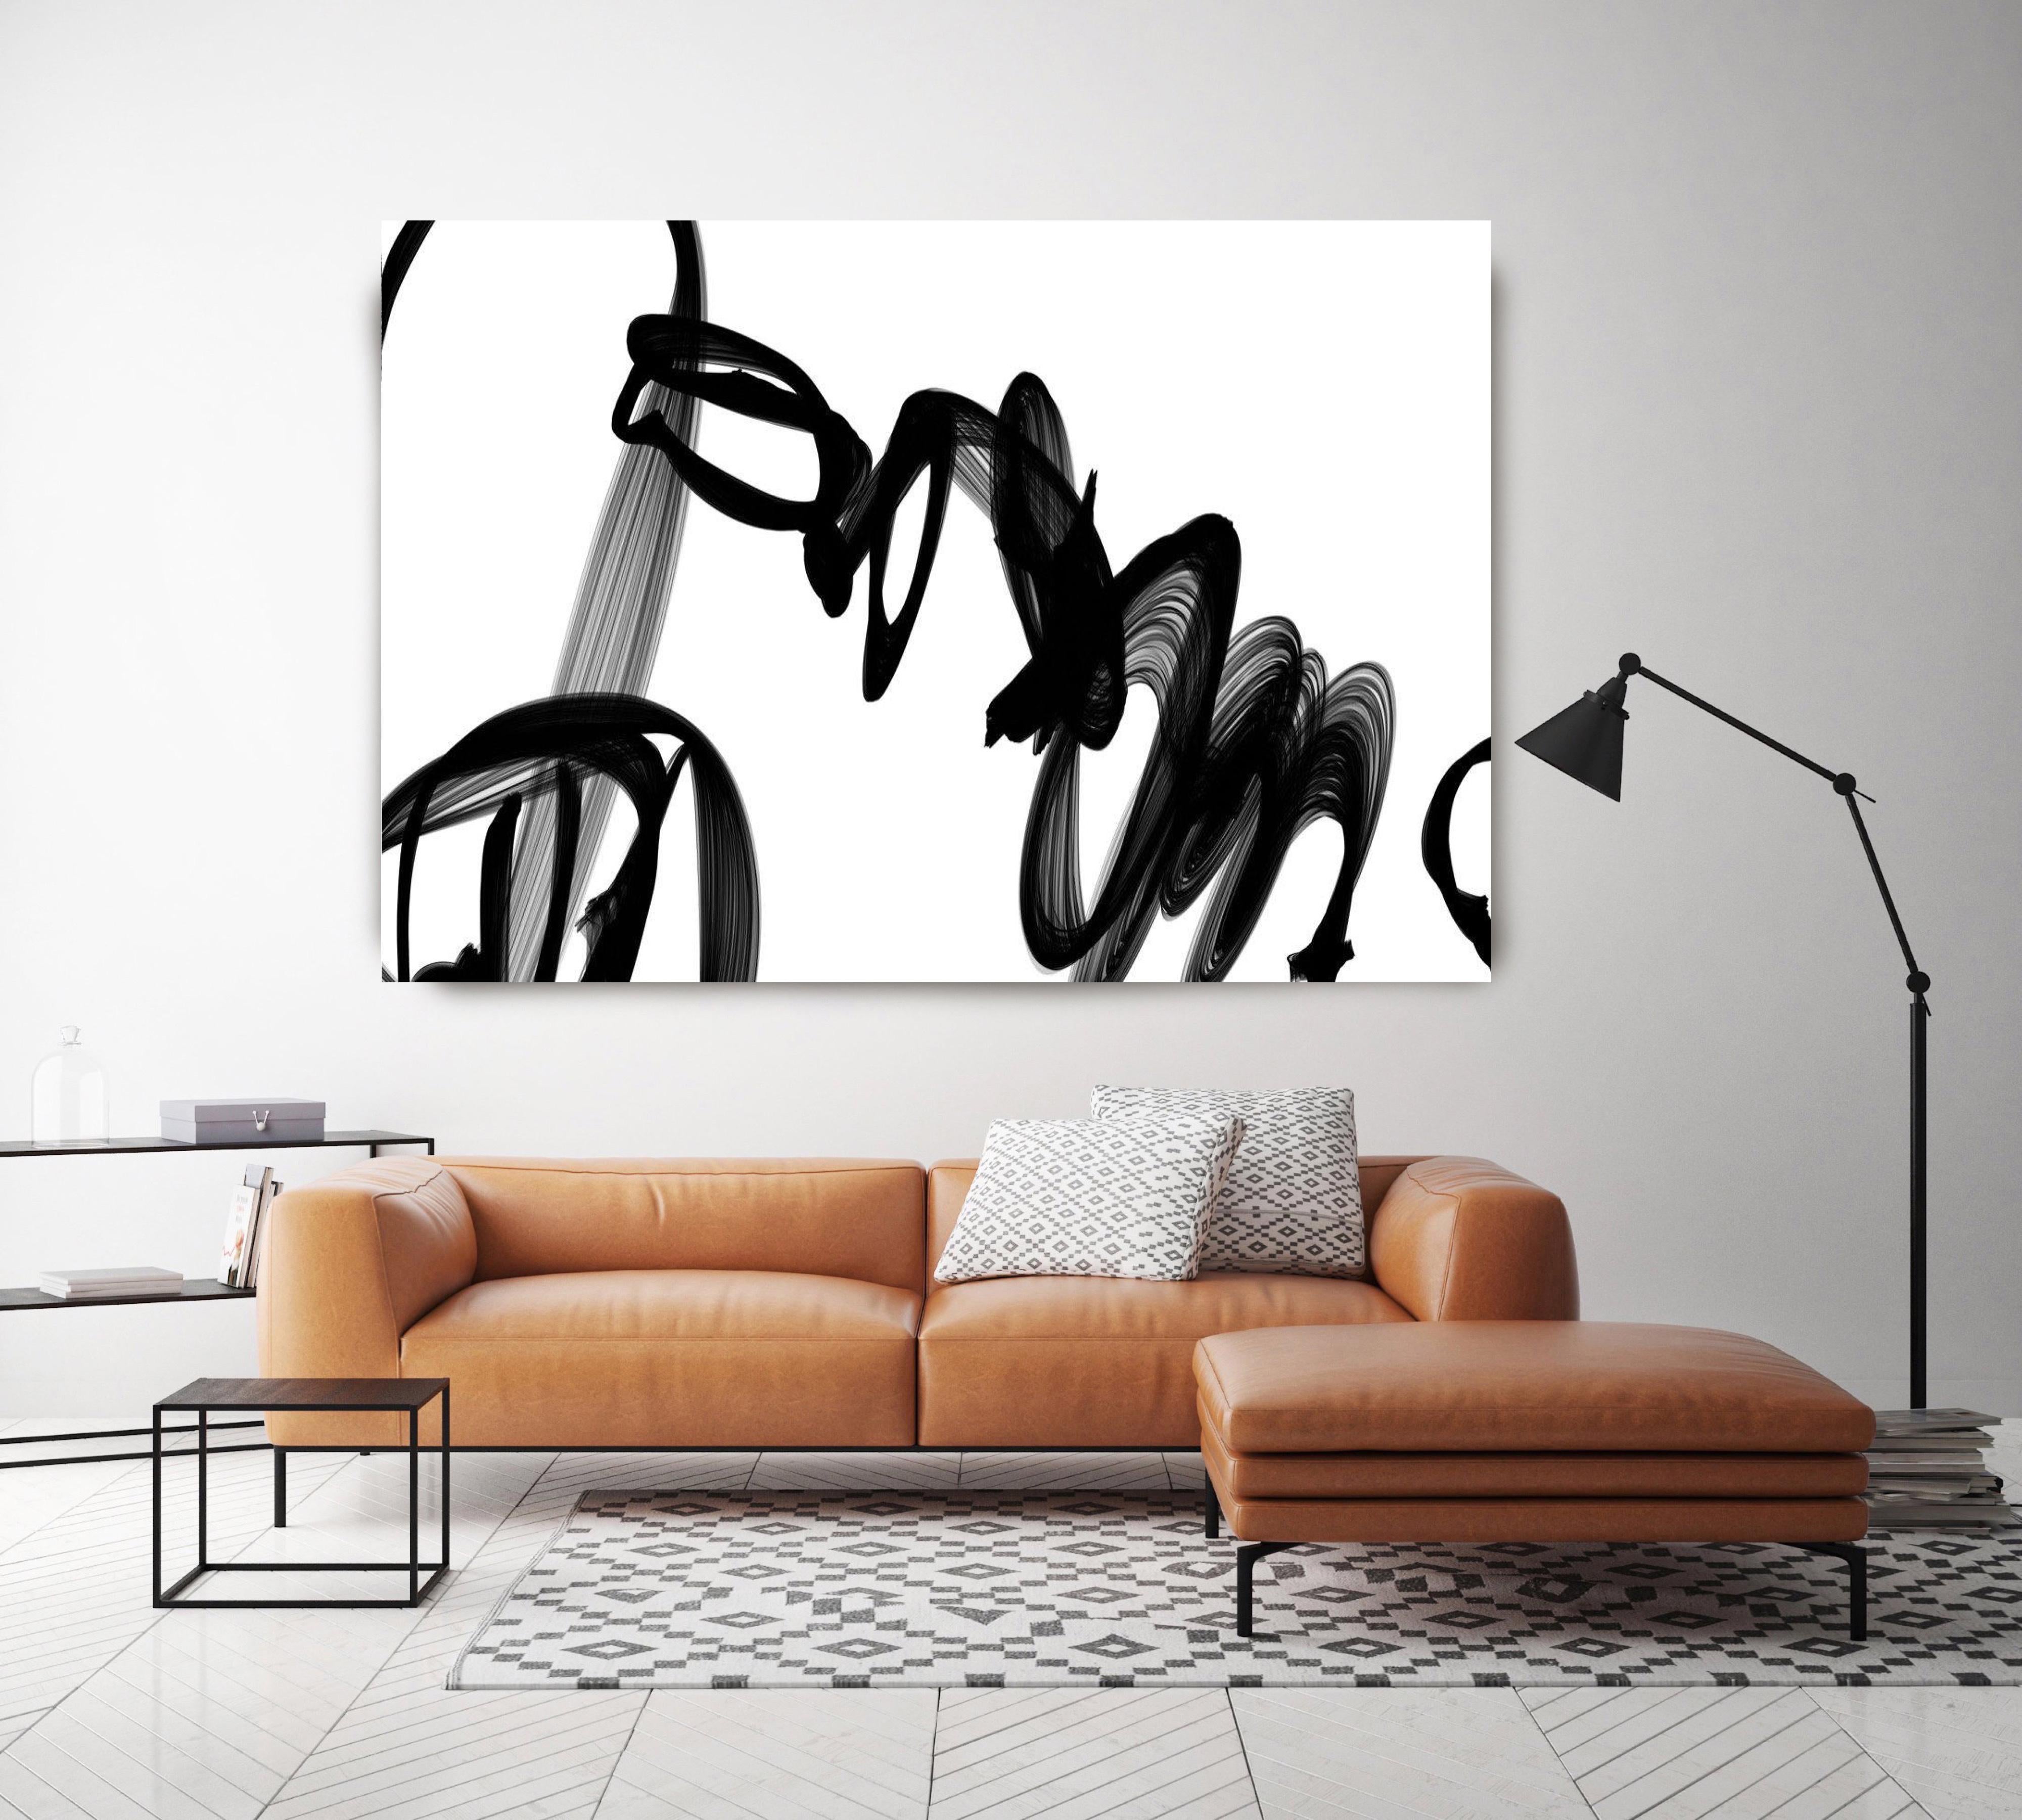 Irena Orlov Interior Painting - Minimalist Abstract in Black and White, Dangerous Seduction 48 x 36" 